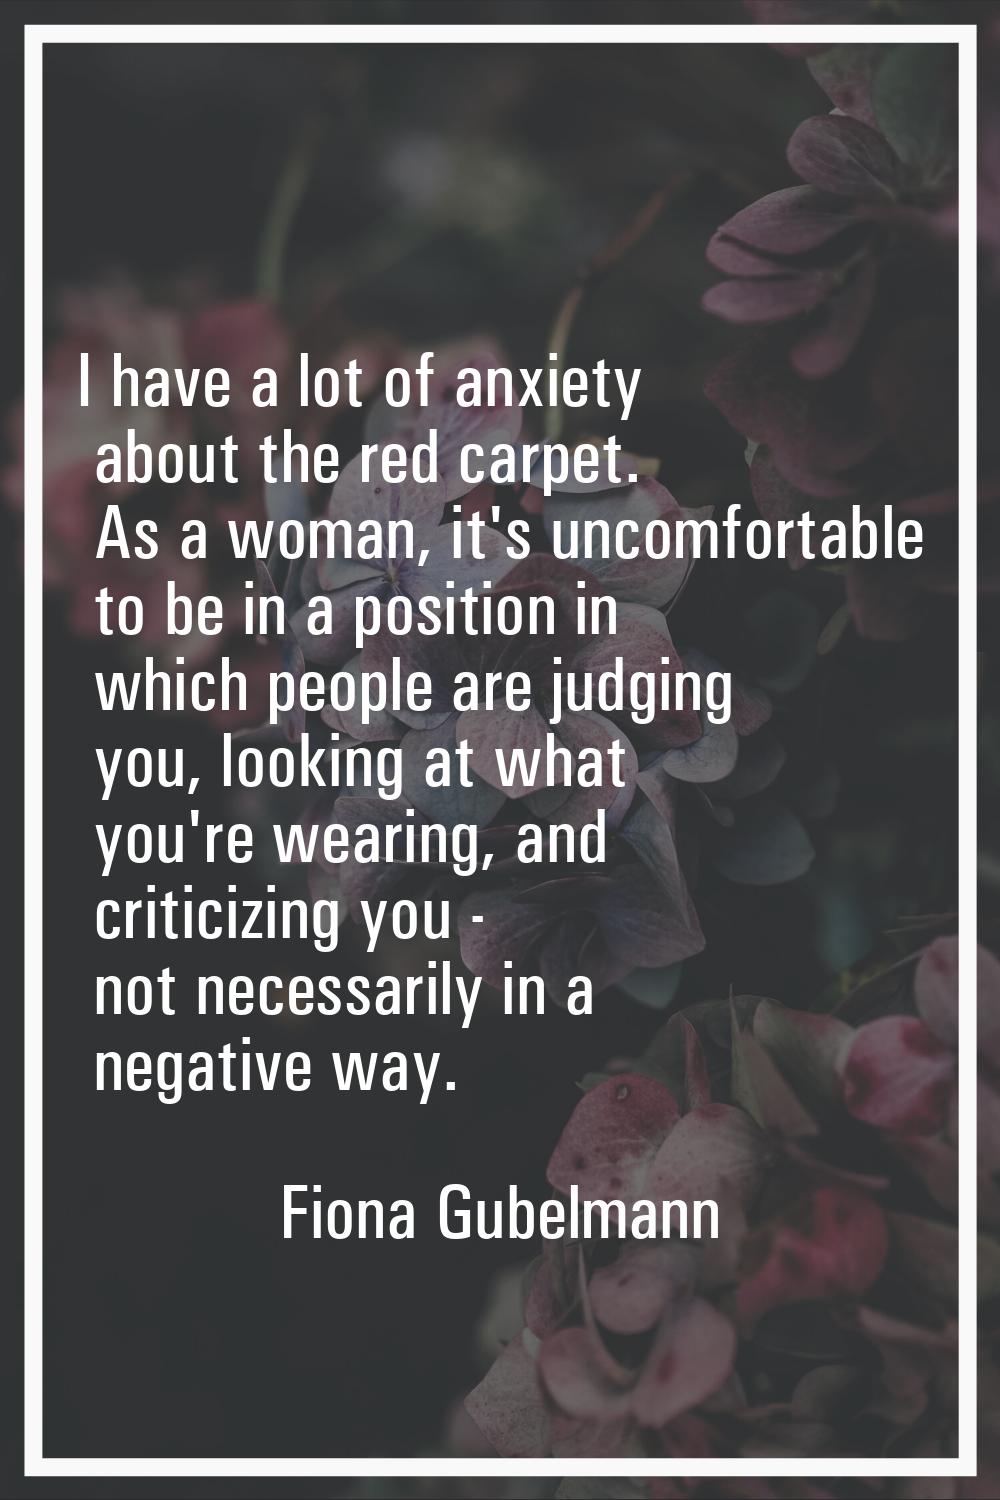 I have a lot of anxiety about the red carpet. As a woman, it's uncomfortable to be in a position in